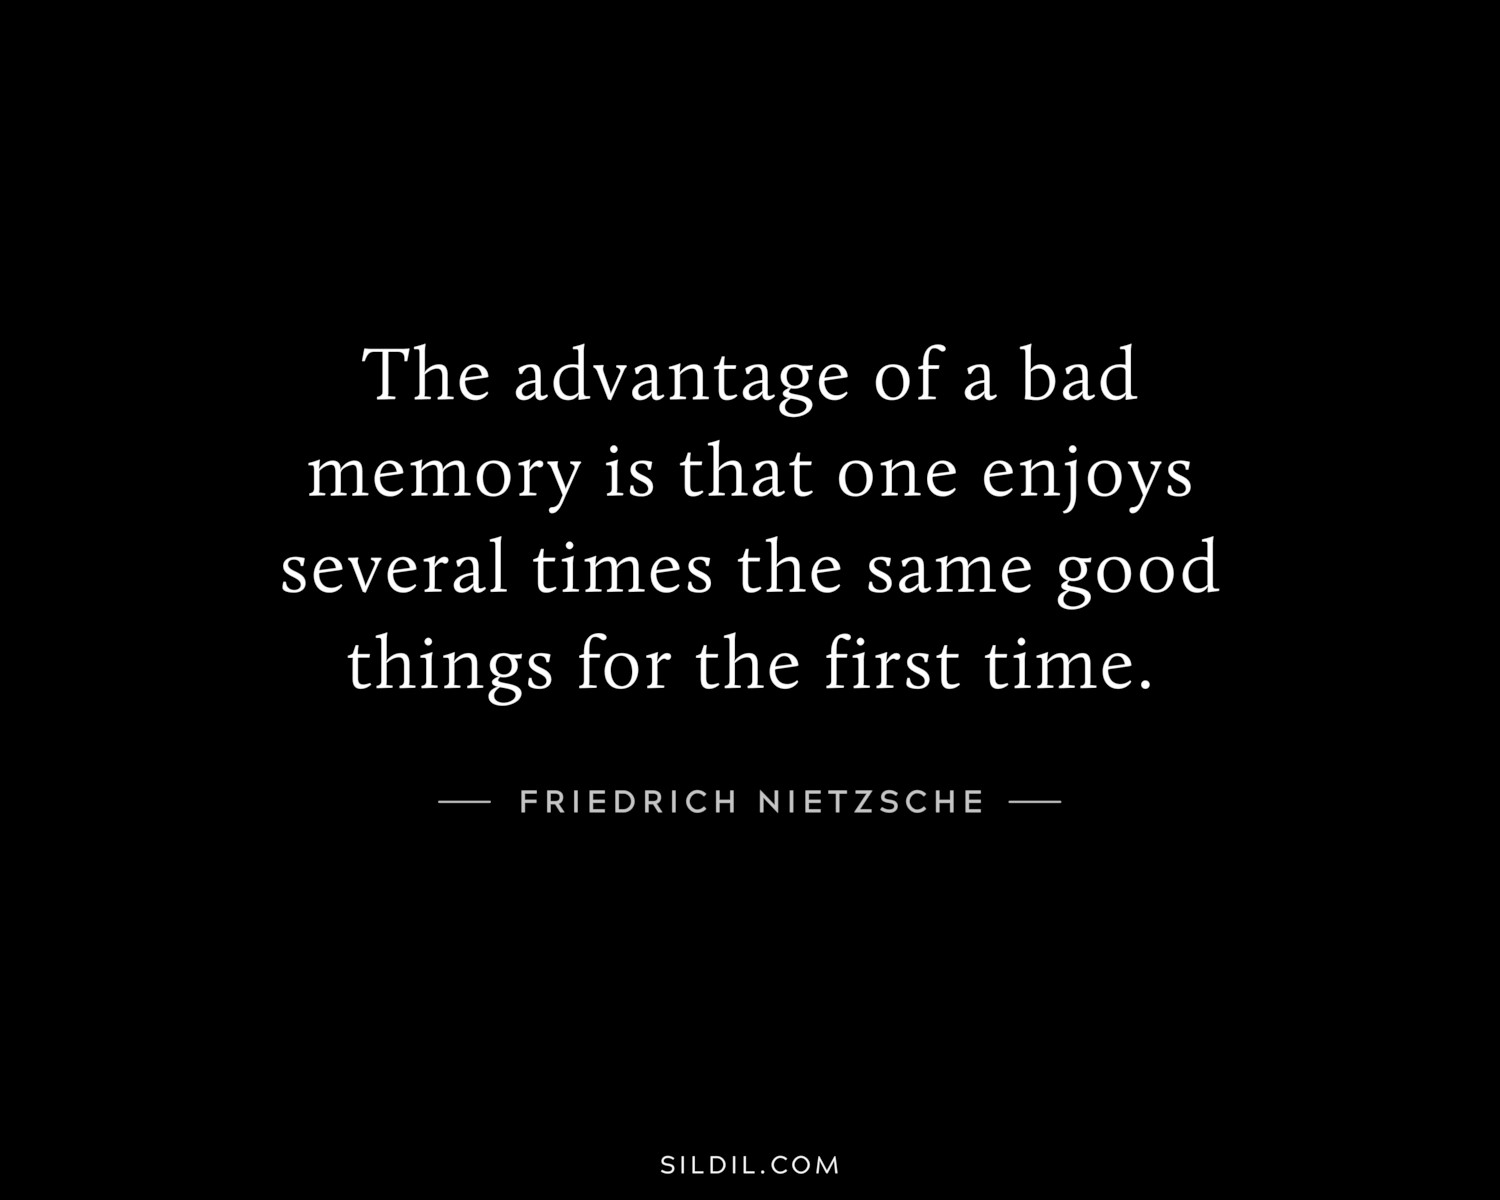 The advantage of a bad memory is that one enjoys several times the same good things for the first time.